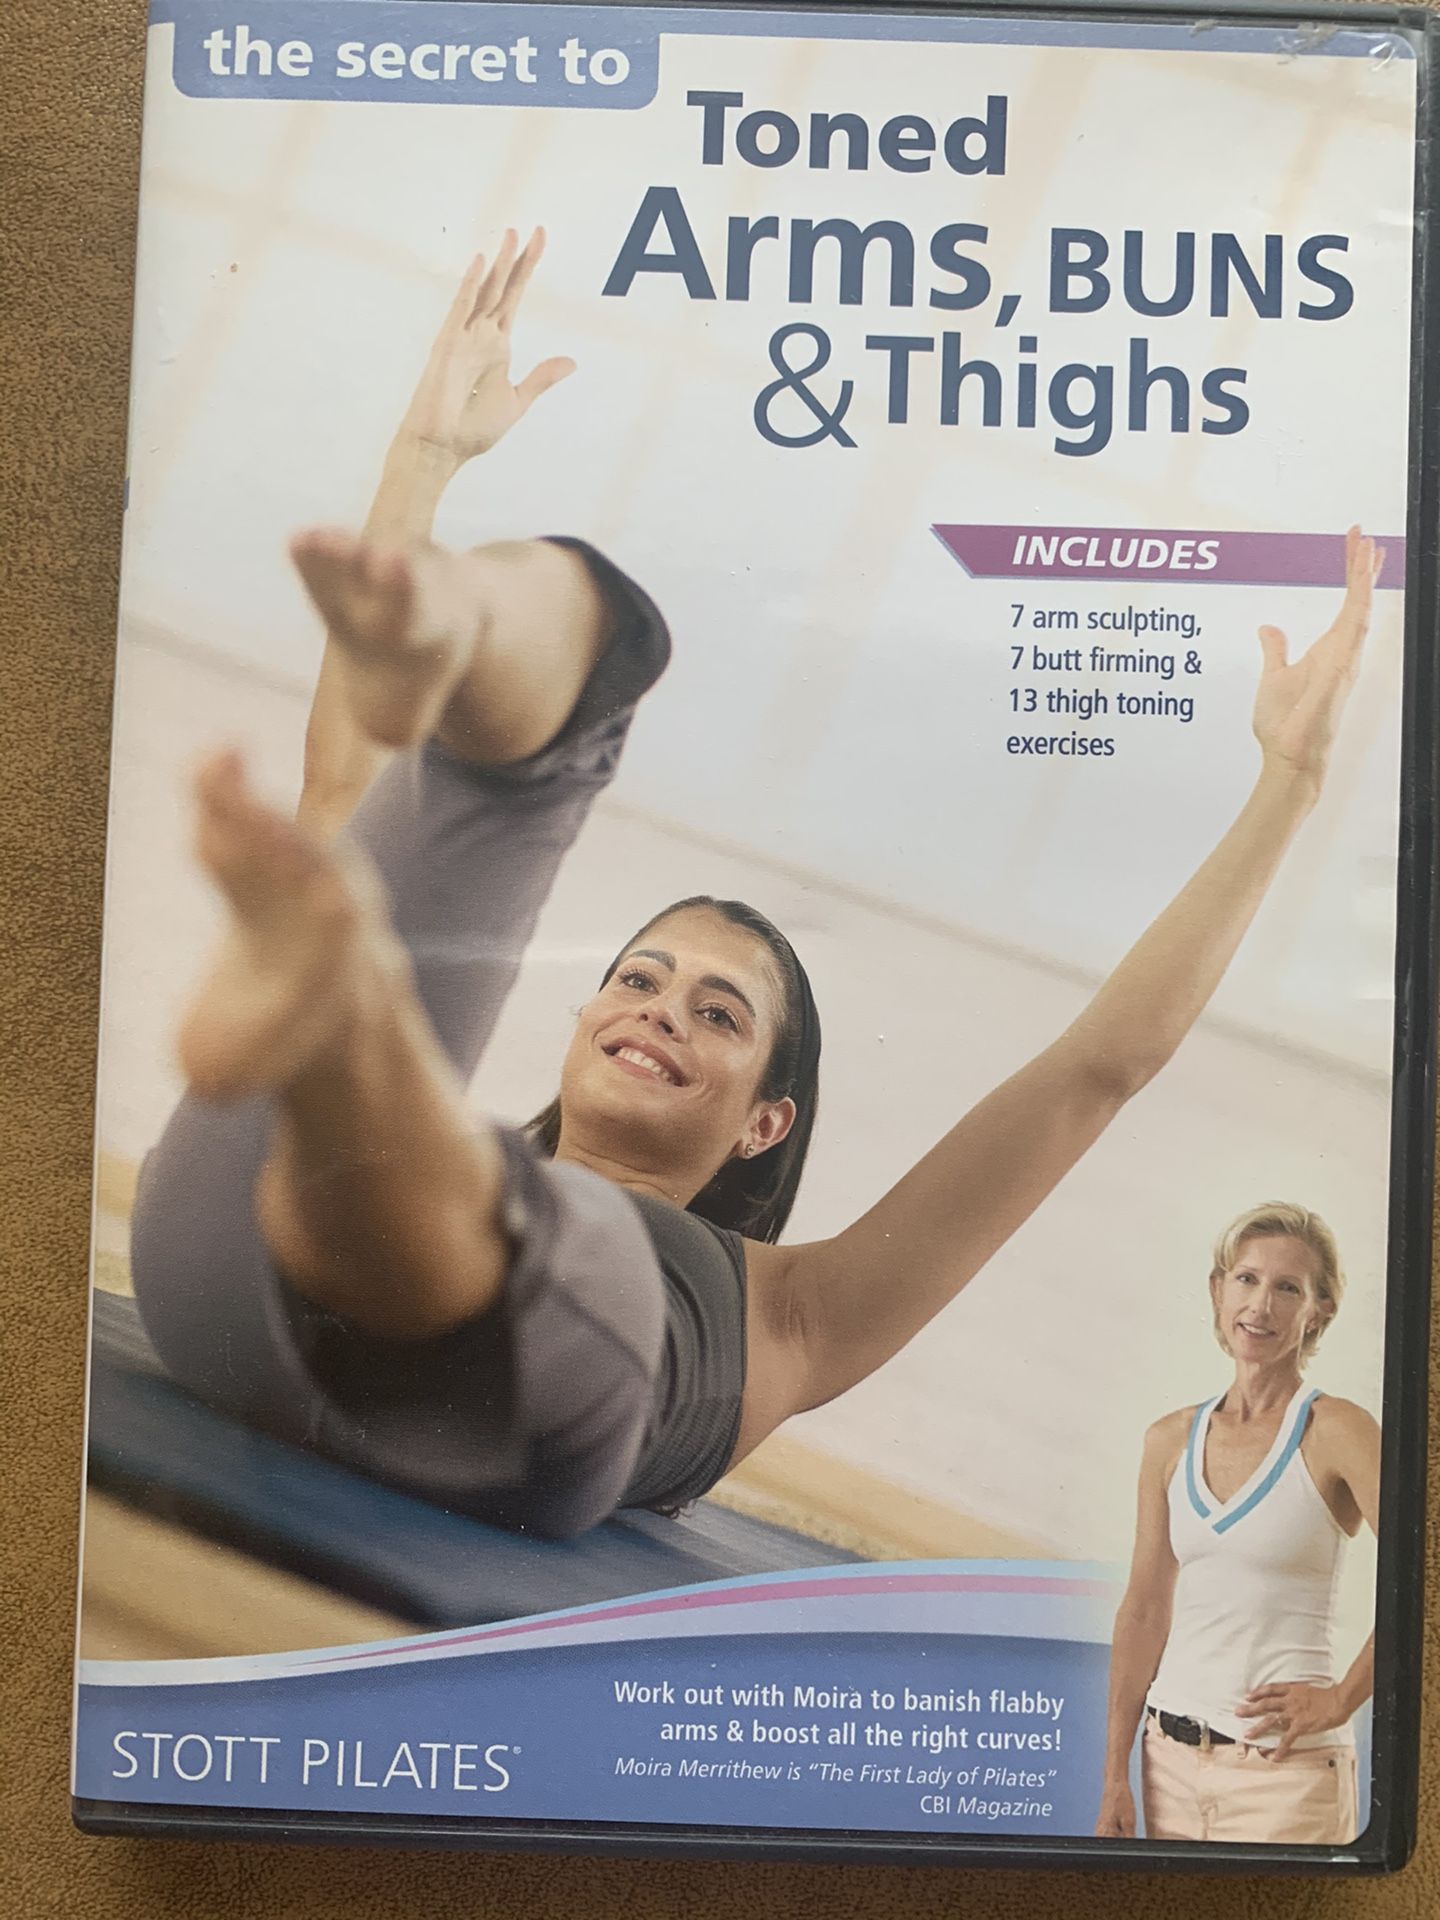 Toned arms, buns & thighs DVD